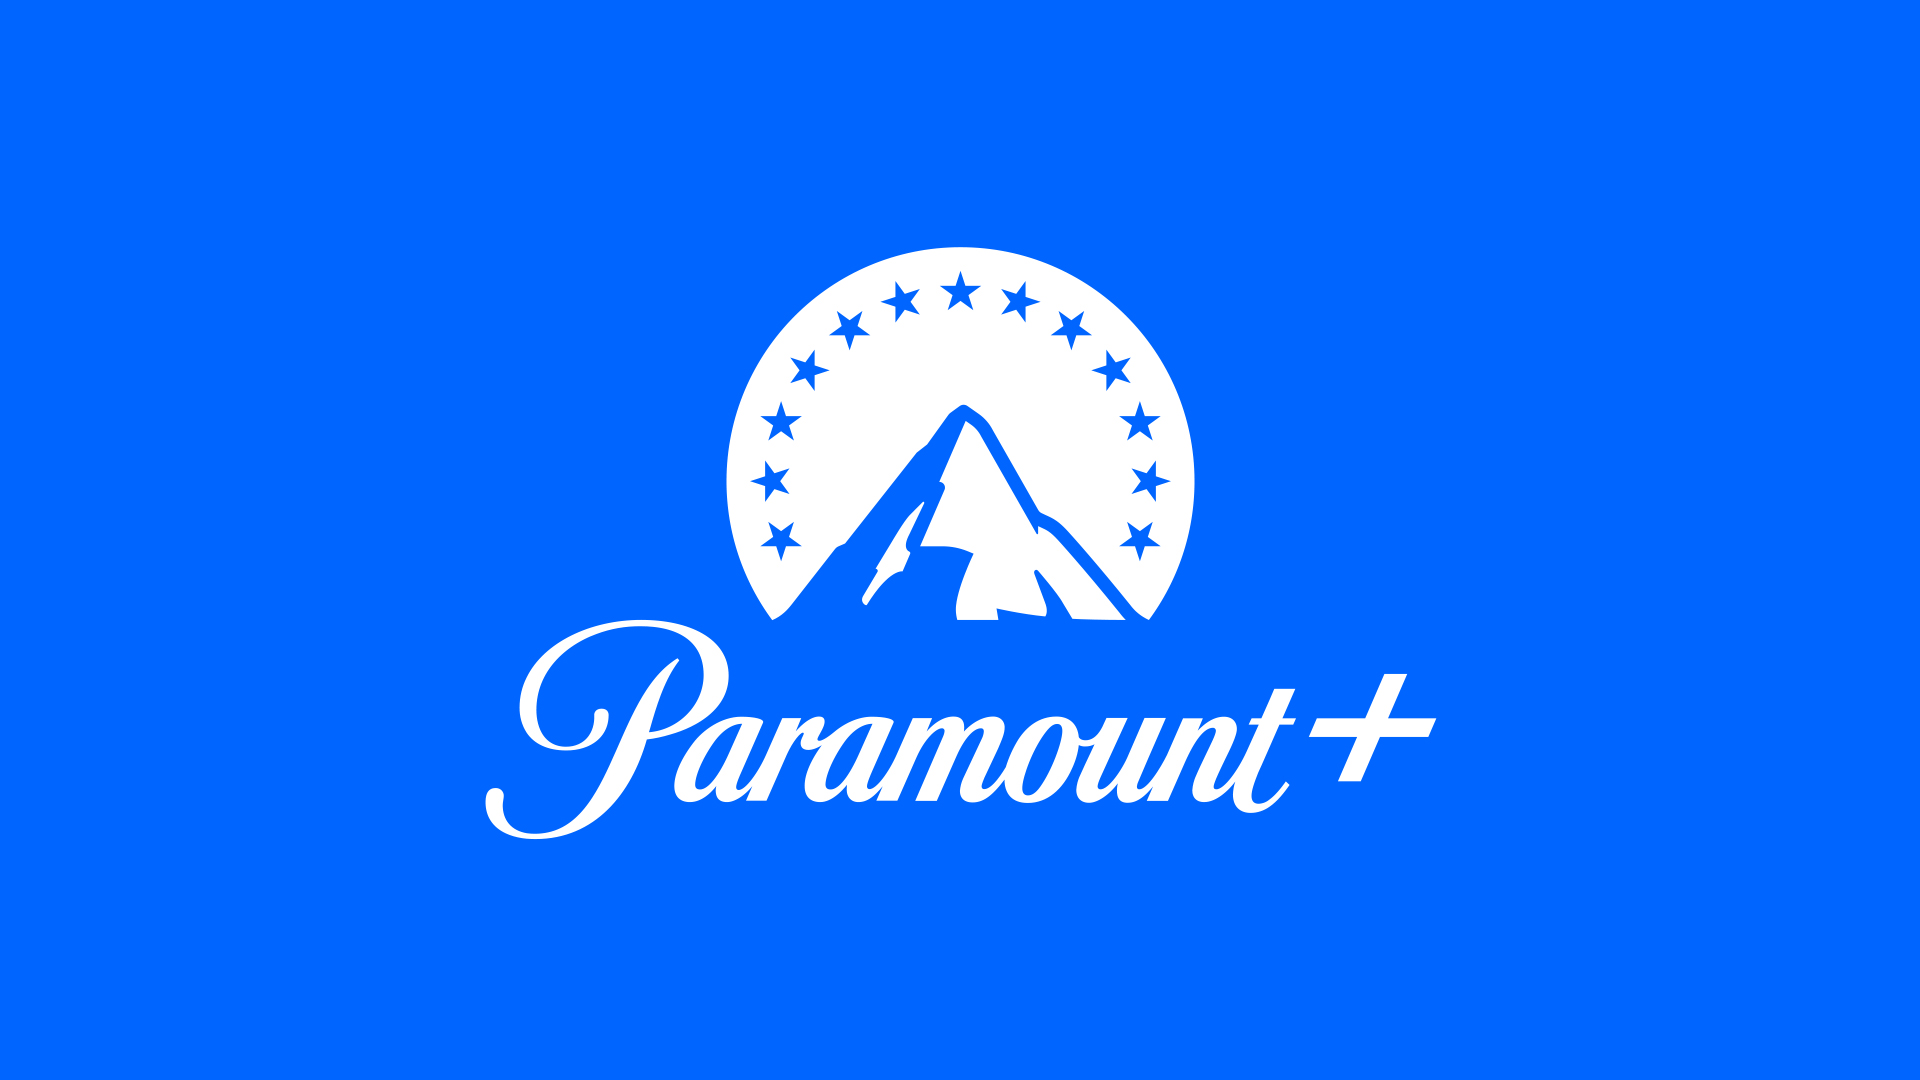 Paramount+ Will Have 30,000+ Episodes at Launch, 36 Original Series This Year